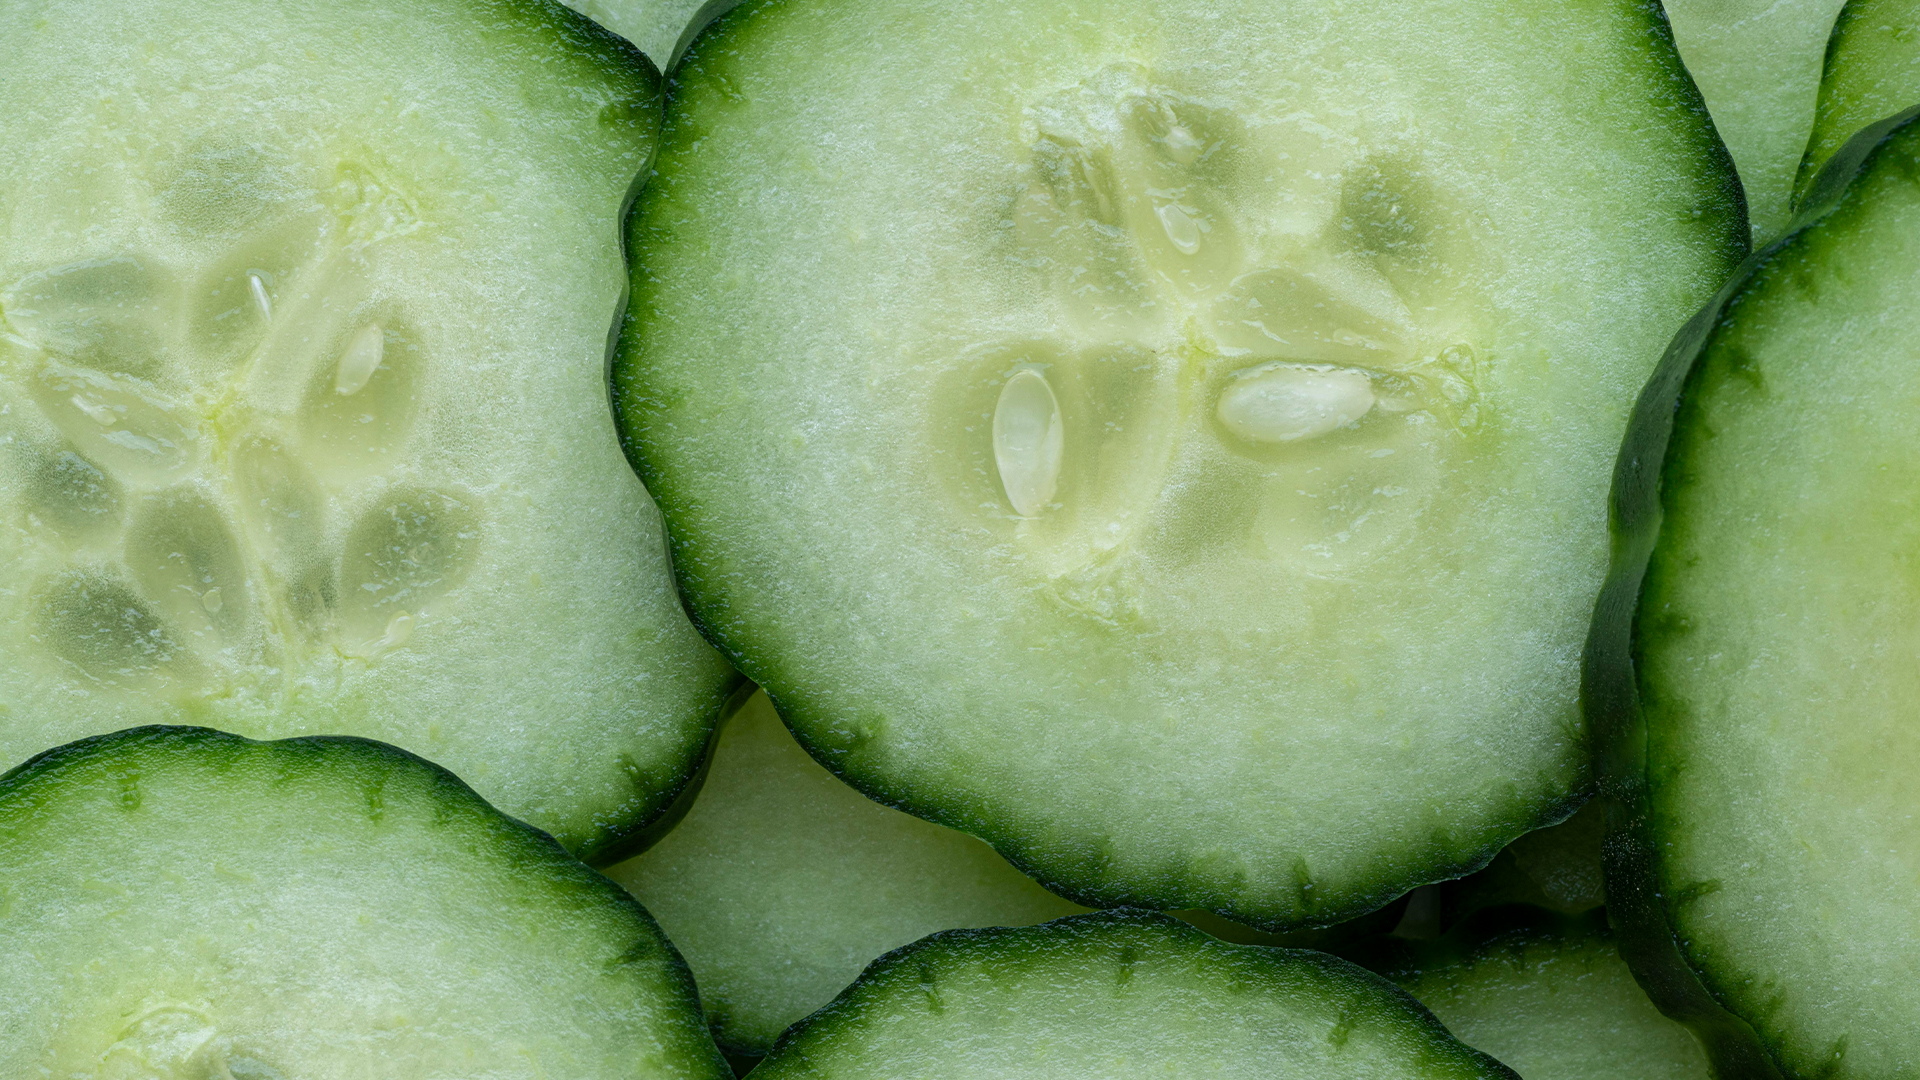 Smashed cucumbers